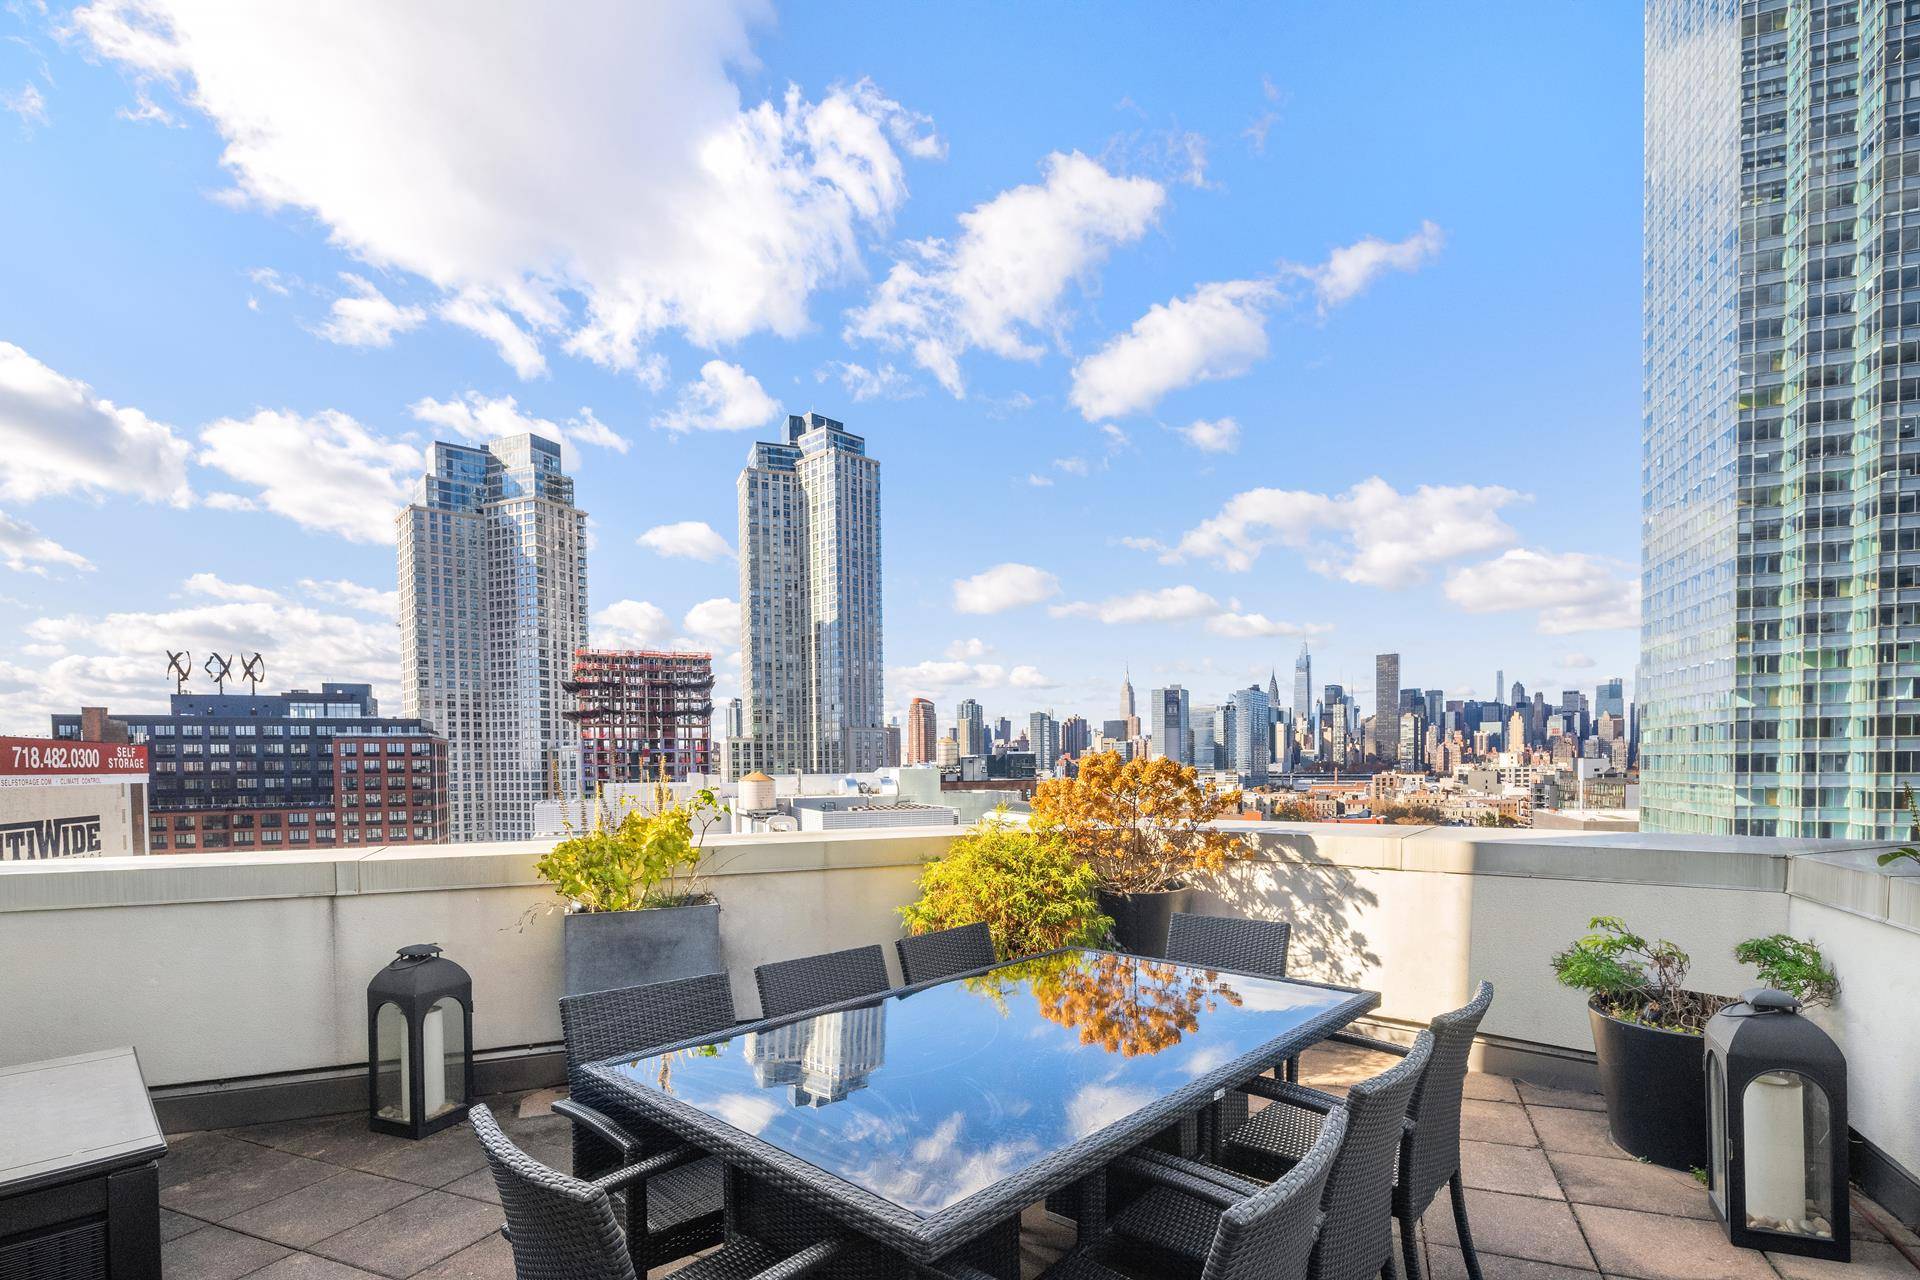 Rare opportunity to own a trophy Long Island City loft penthouse with 5, 400 square feet of living space 2, 750 interior, 2, 640 exterior and sweeping views of the ...